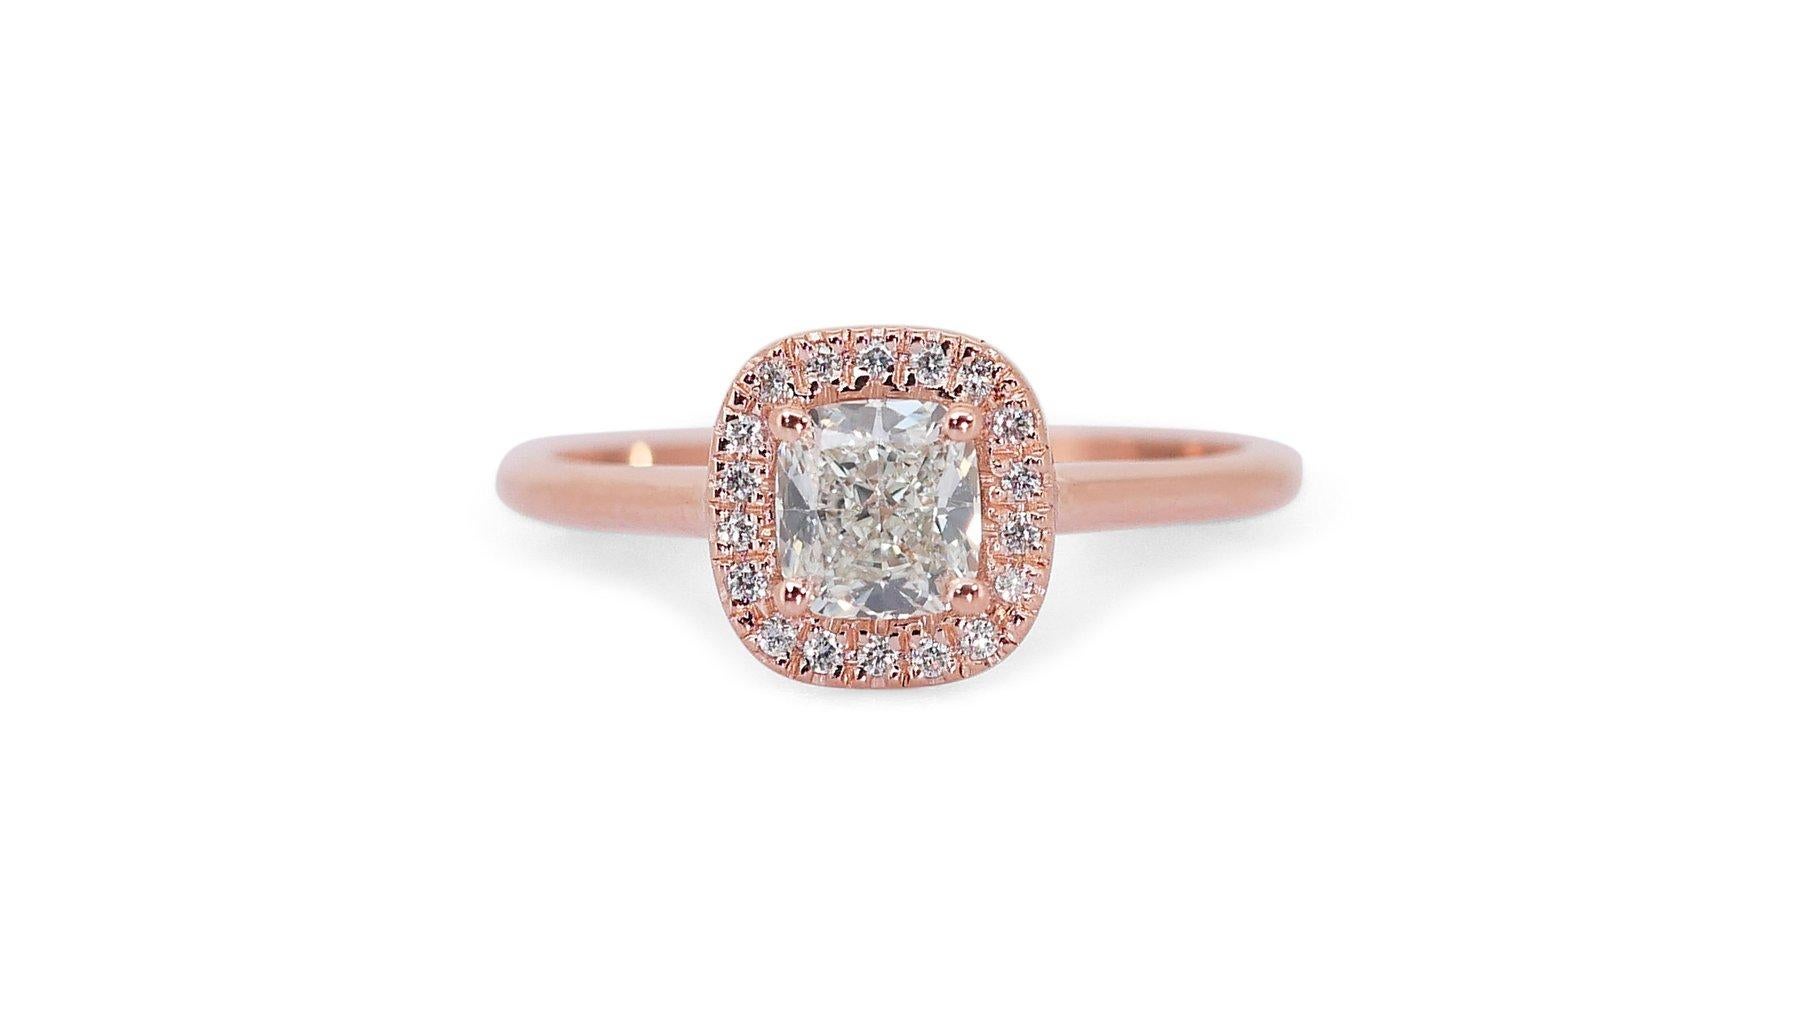 Gorgeous 1.60ct Diamonds Halo Ring in 18k Rose Gold - GIA Certified For Sale 3